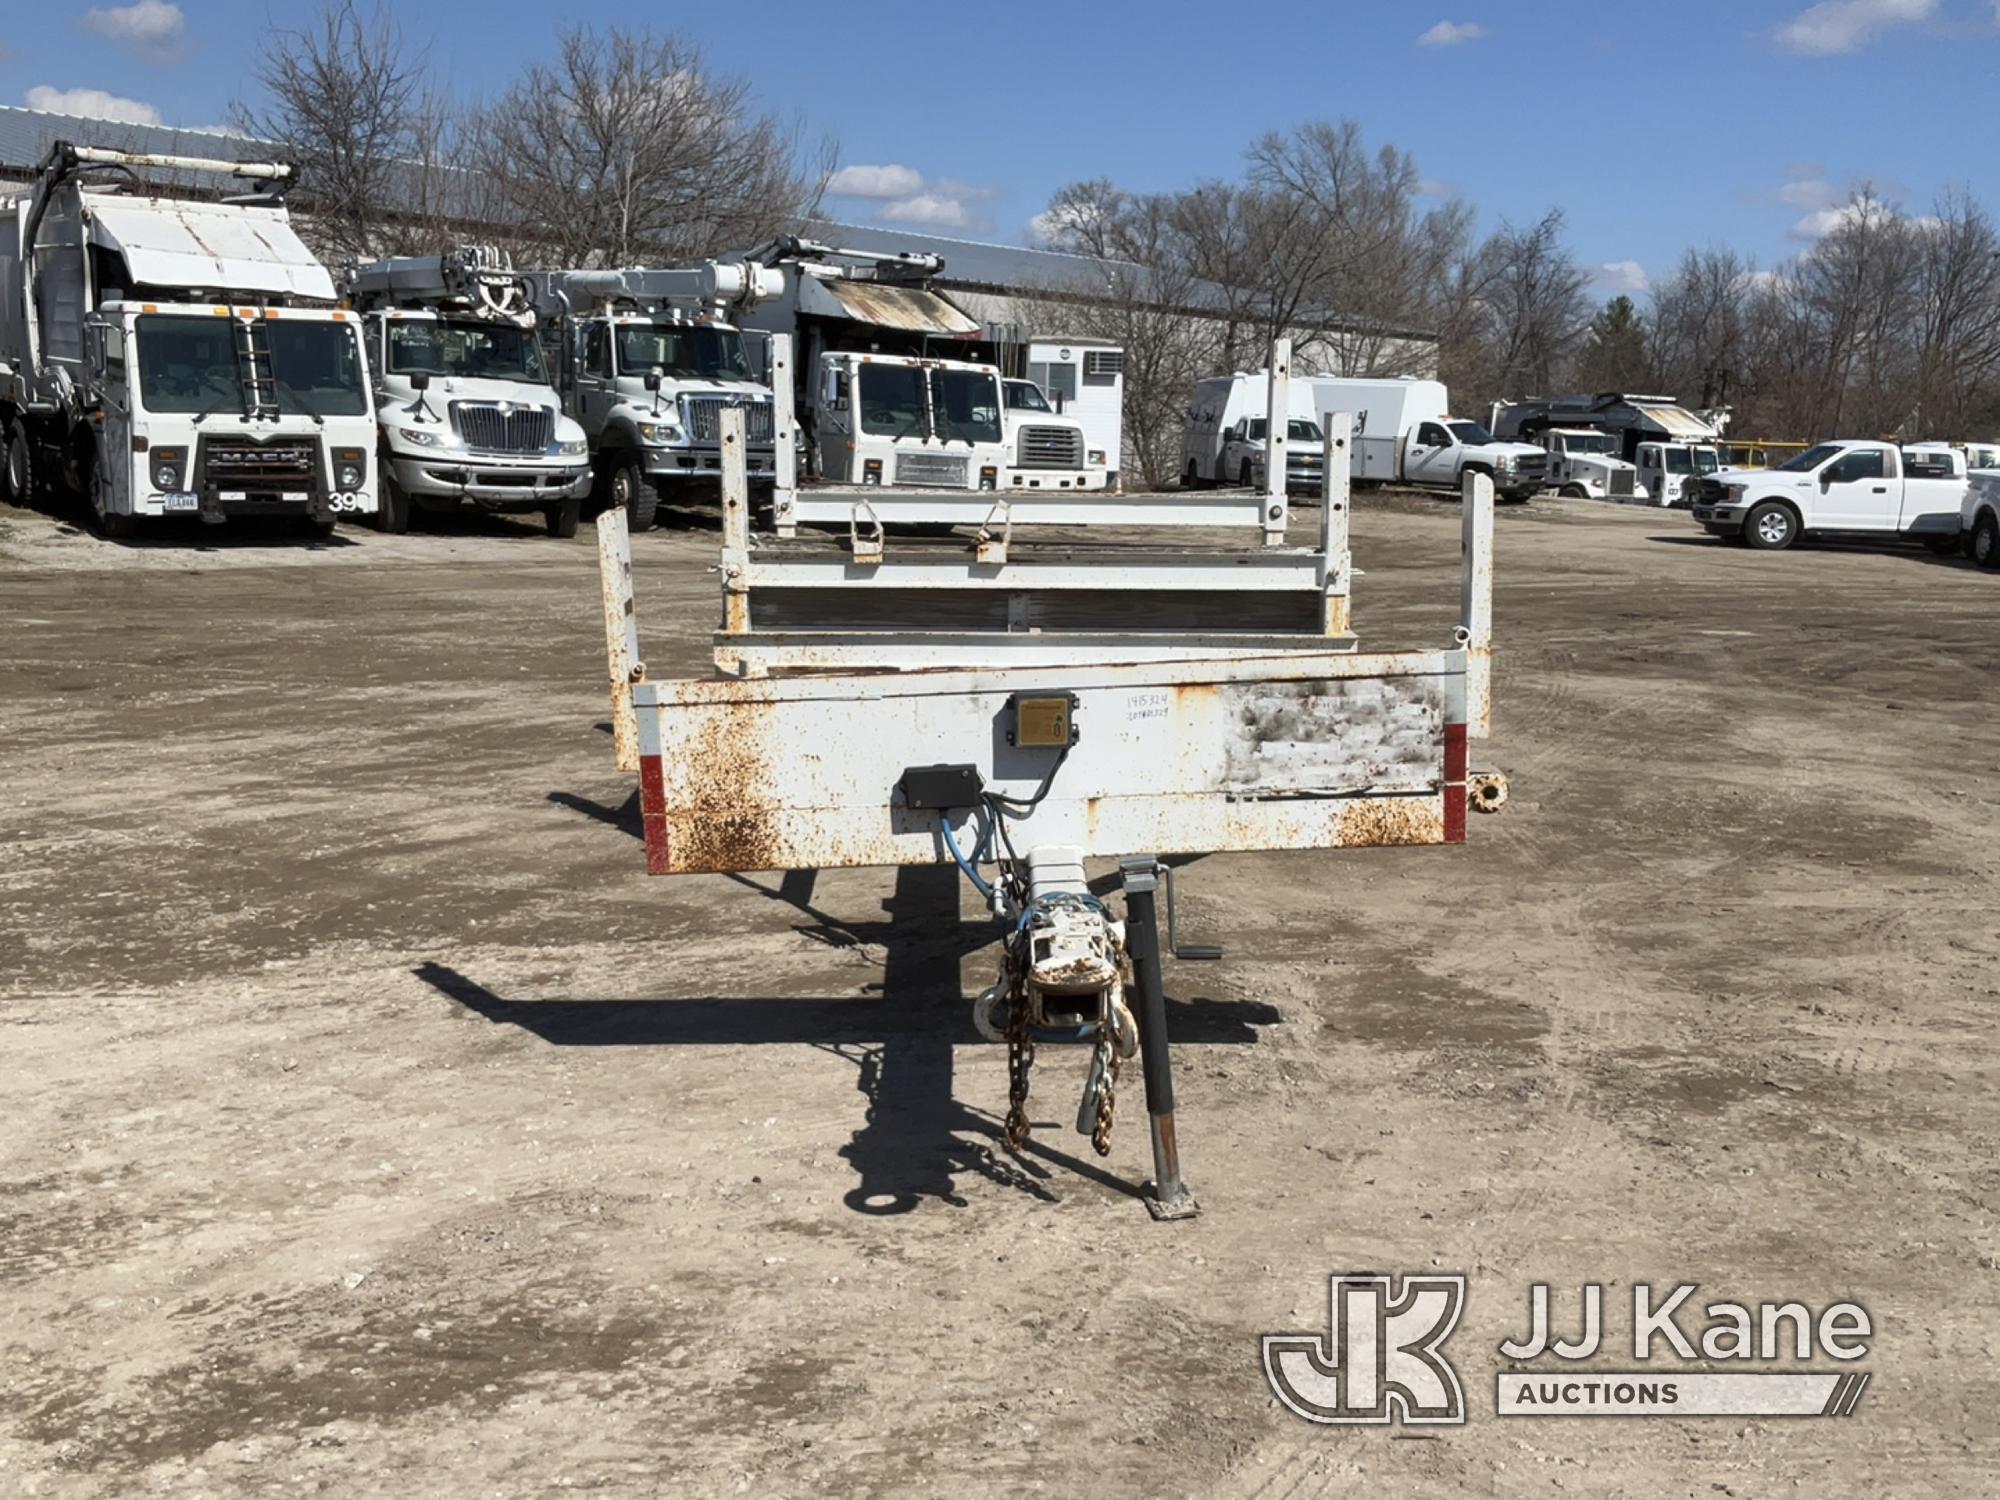 (Des Moines, IA) 1999 Brindle Extendable Pole/Material Trailer, trailer 19 ft. 9in. x 7ft 8in, deck